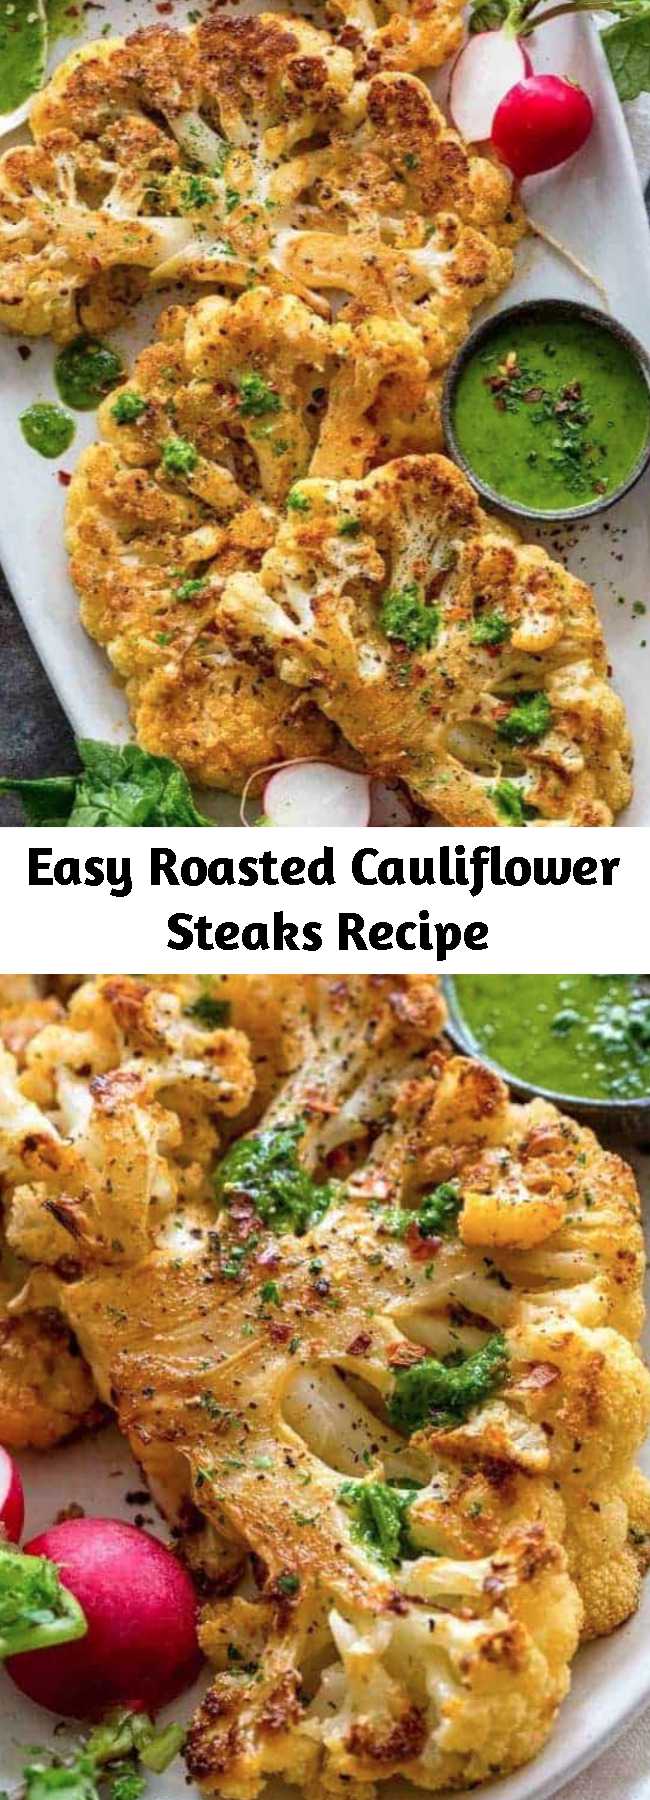 Easy Roasted Cauliflower Steaks Recipe - Cauliflower steaks are easy to make entre that is oven roasted with simple seasonings like salt, pepper, garlic powder, and paprika. Cutting the cauliflower into thick slices makes for a hearty and satisfying plant-based meal. Serve the vegetable steak with a flavorful sauce or toppings for a customizable dish. I recommend serving these vegetable steaks with a flavorful sauce. #cauliflower #vegan #vegetarian #healthyrecipe